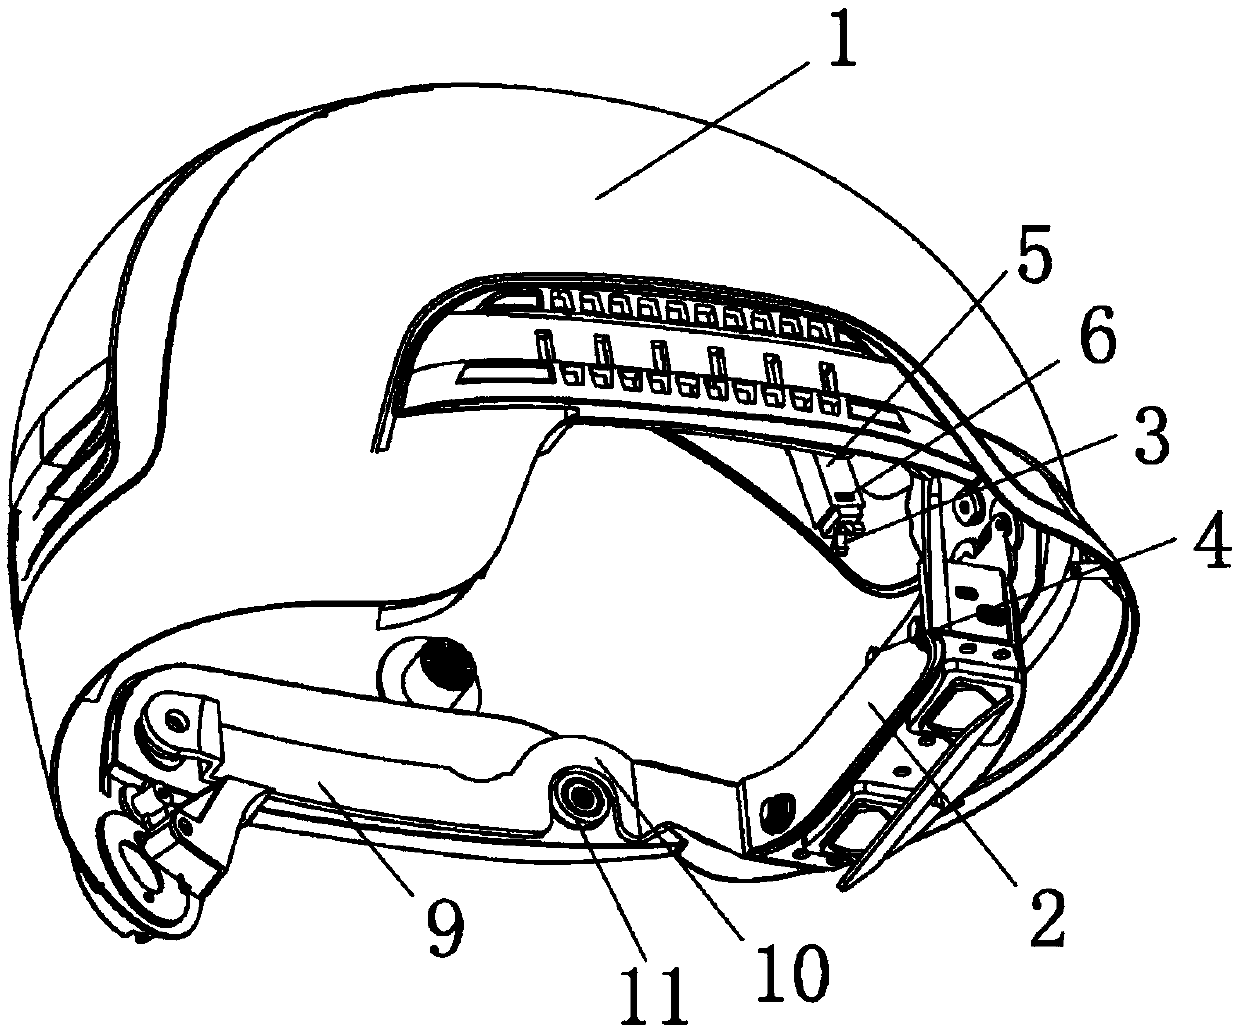 Video module storage structure and helmet